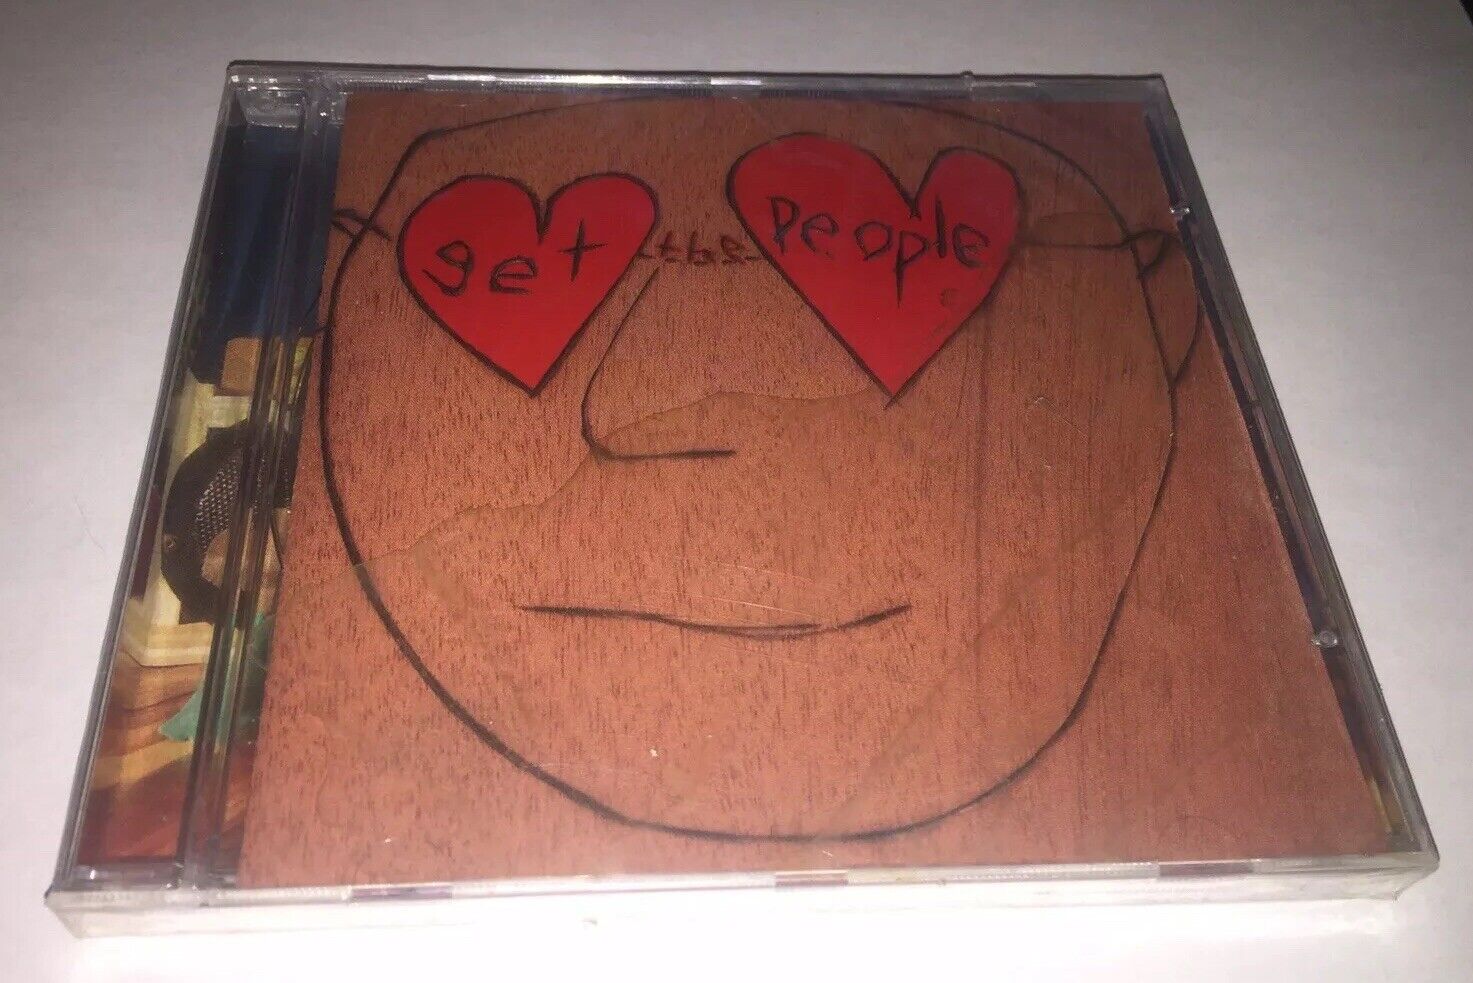 New Sealed The Get People Self Titled Cd 2007 Hard To Find First Cd